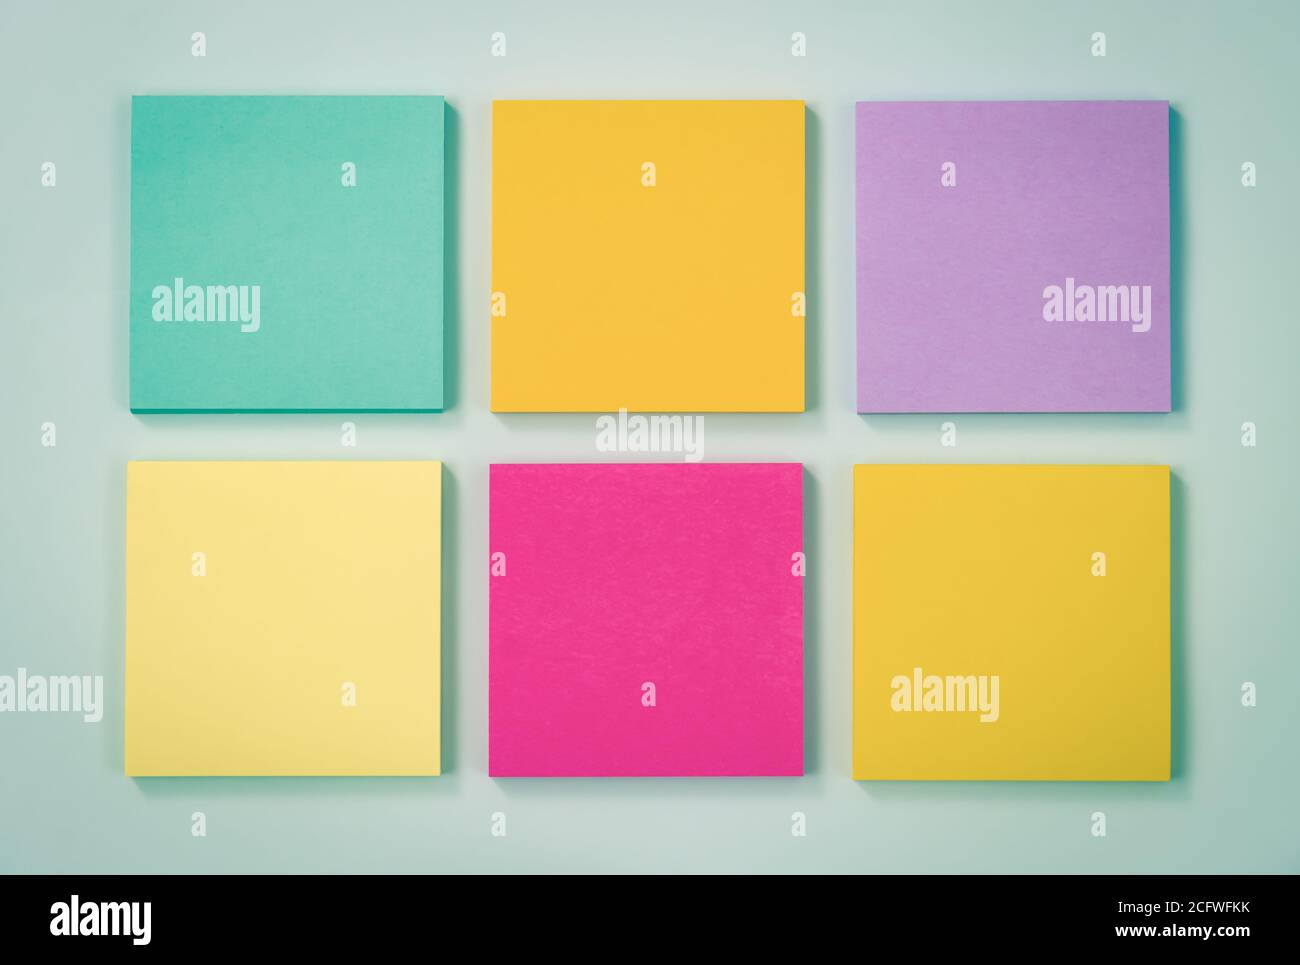 6 Color Sticky Note or Note Pad as Green,Purple,Pink,Yellow on Modern Clean Creative Office Desk or Office Table on Top View. Office Supplies on Blue Stock Photo